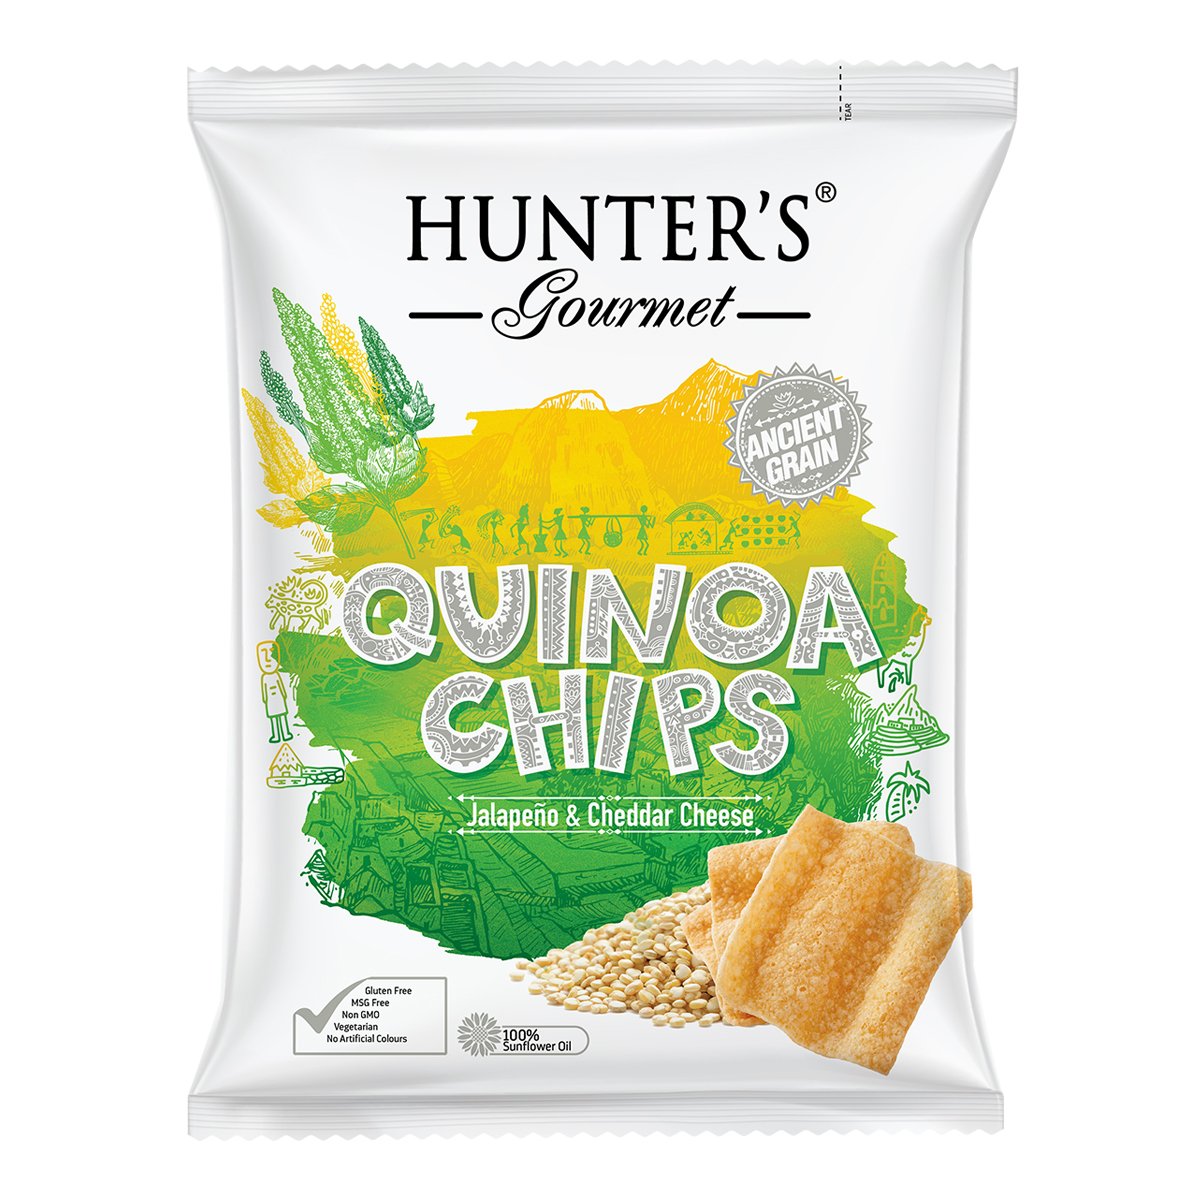 HUNTER'S GOURMET Jalapeno & Cheddar Cheese Quinoa Chips, 75g